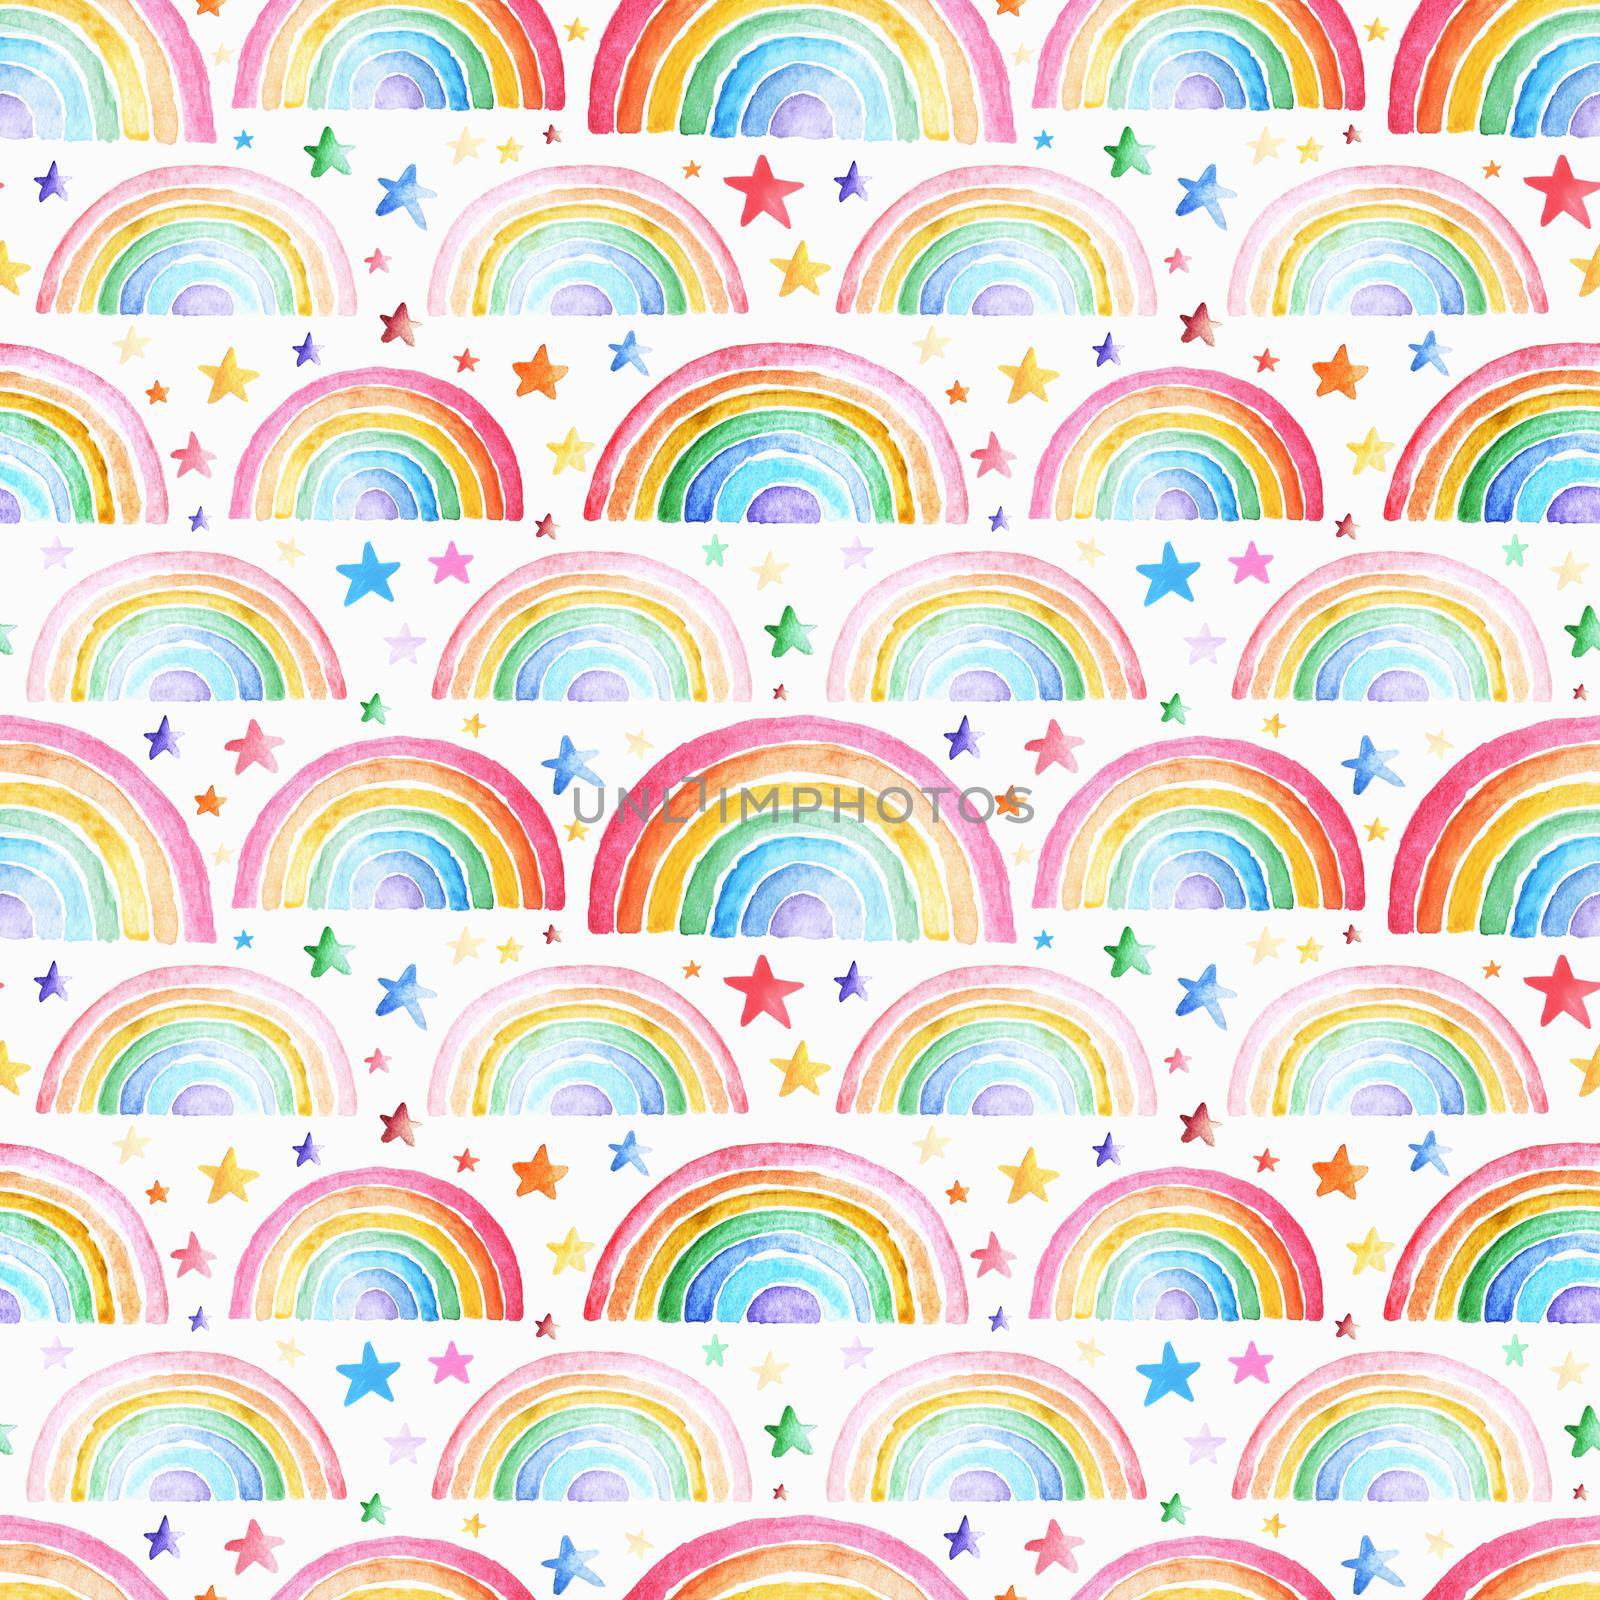 Pattern with colored watercolor rainbows and stars. Watercolor seamless print. Children's illustration. Print for textiles, wallpapers, websites and social networks.